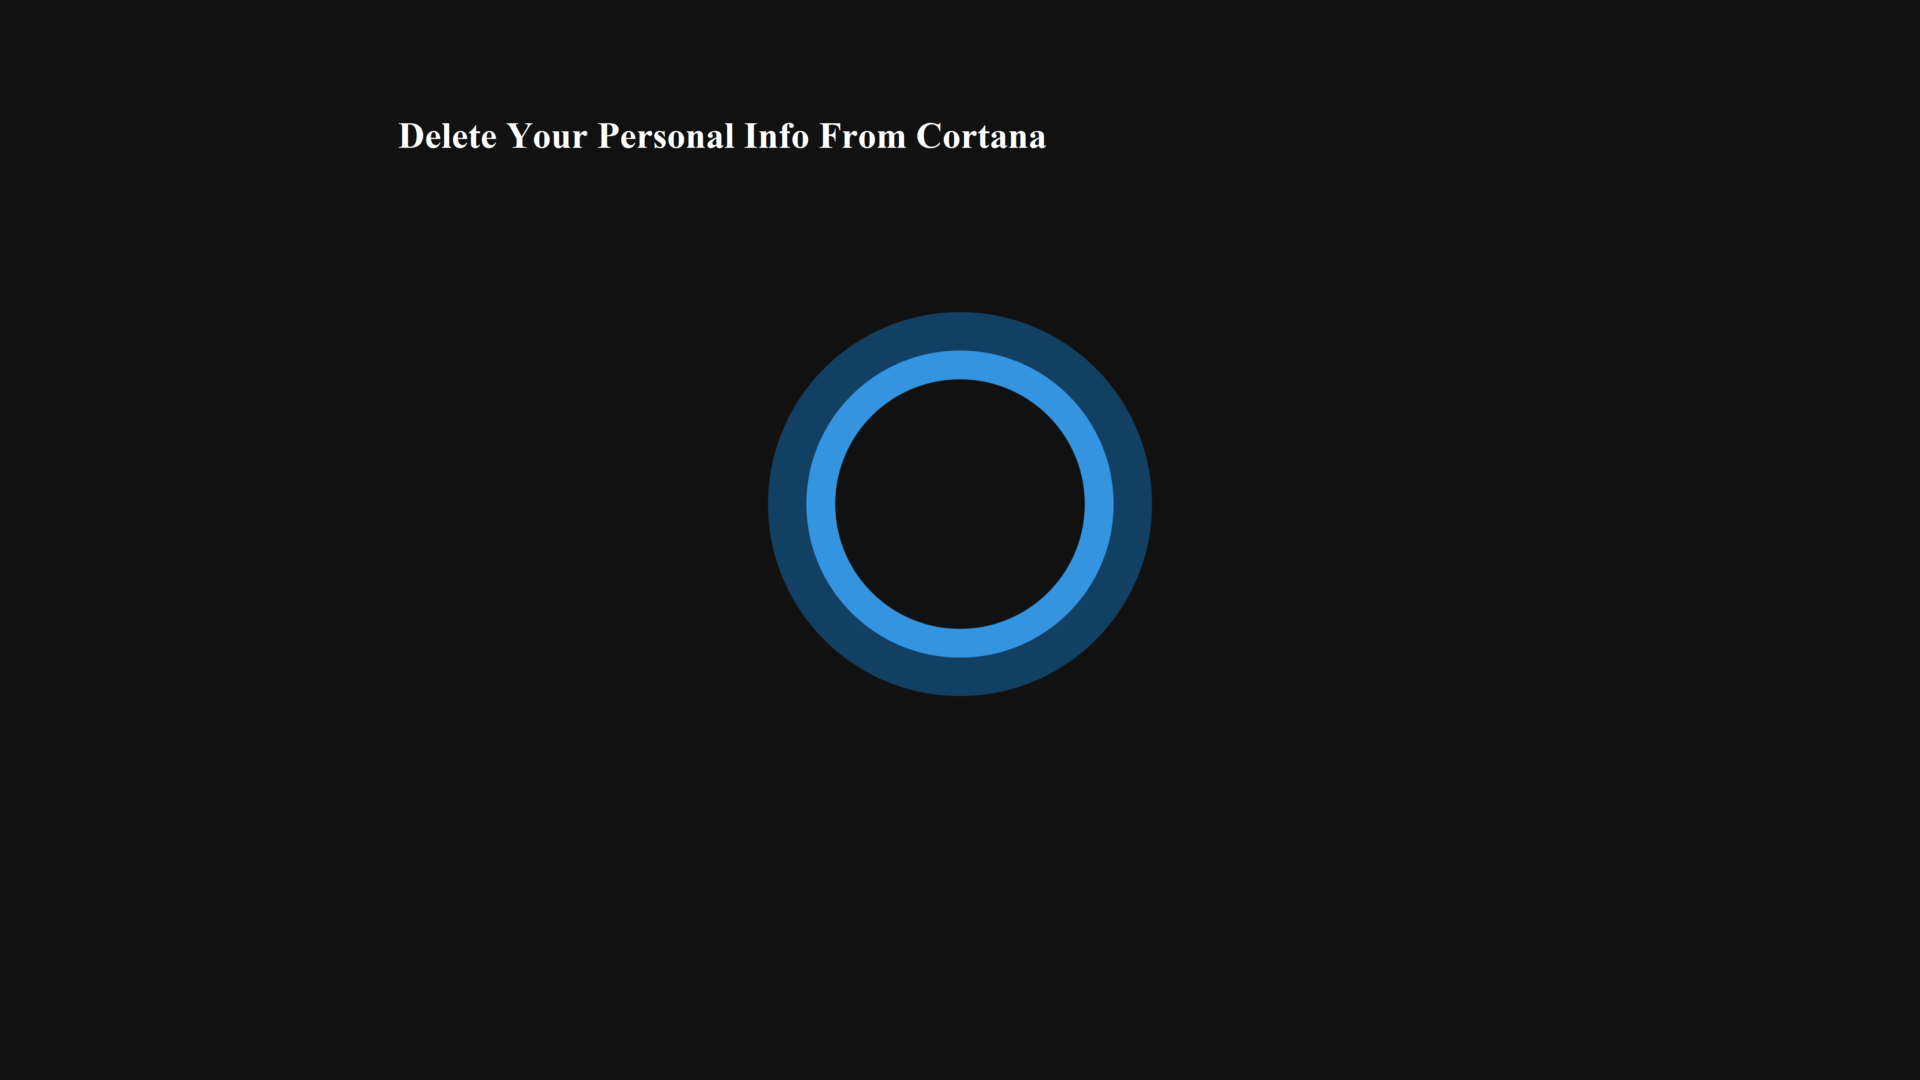 How to Delete Your Personal Information from Cortana?